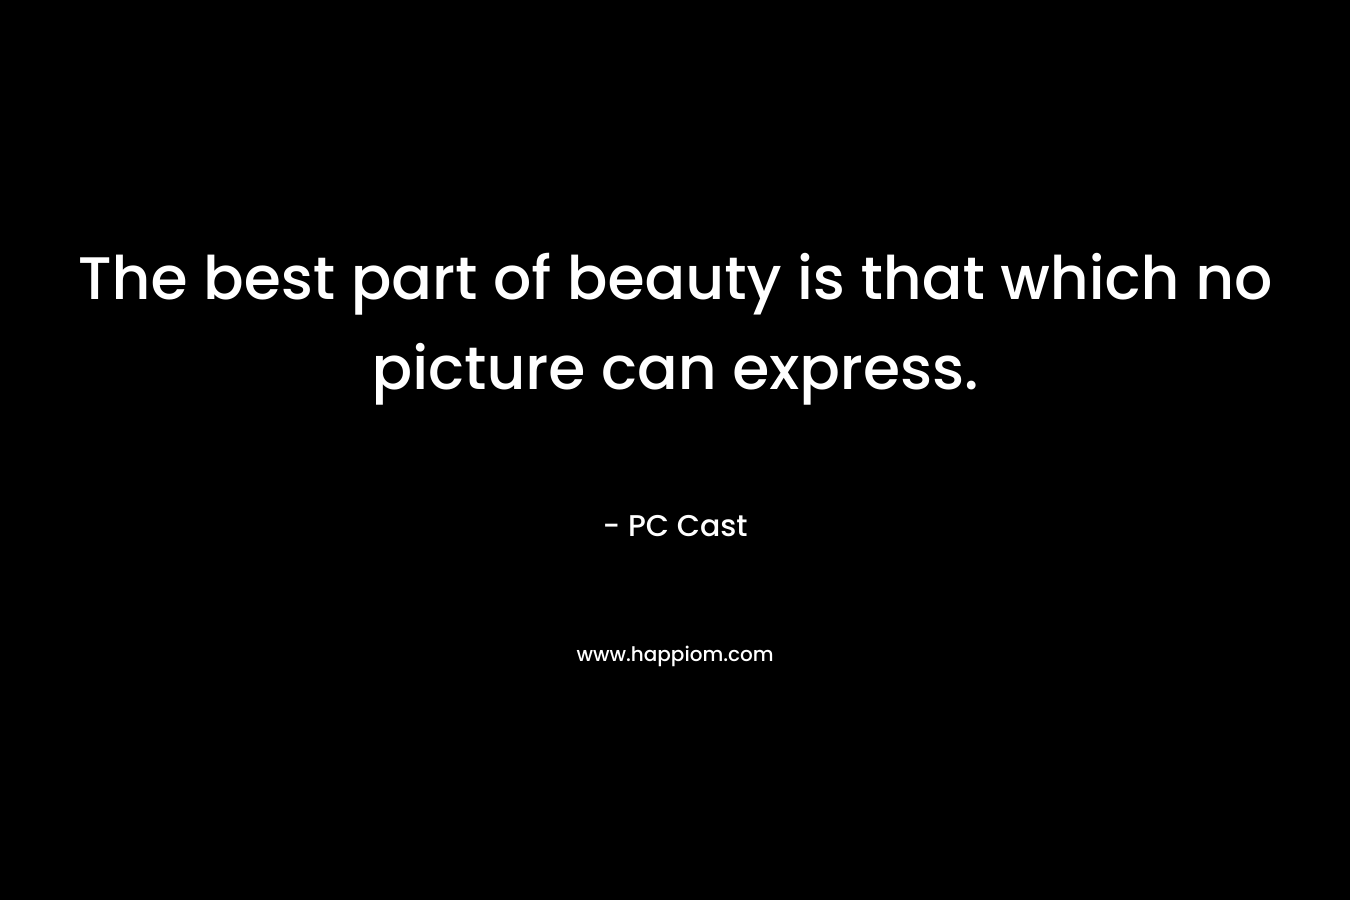 The best part of beauty is that which no picture can express. – PC Cast